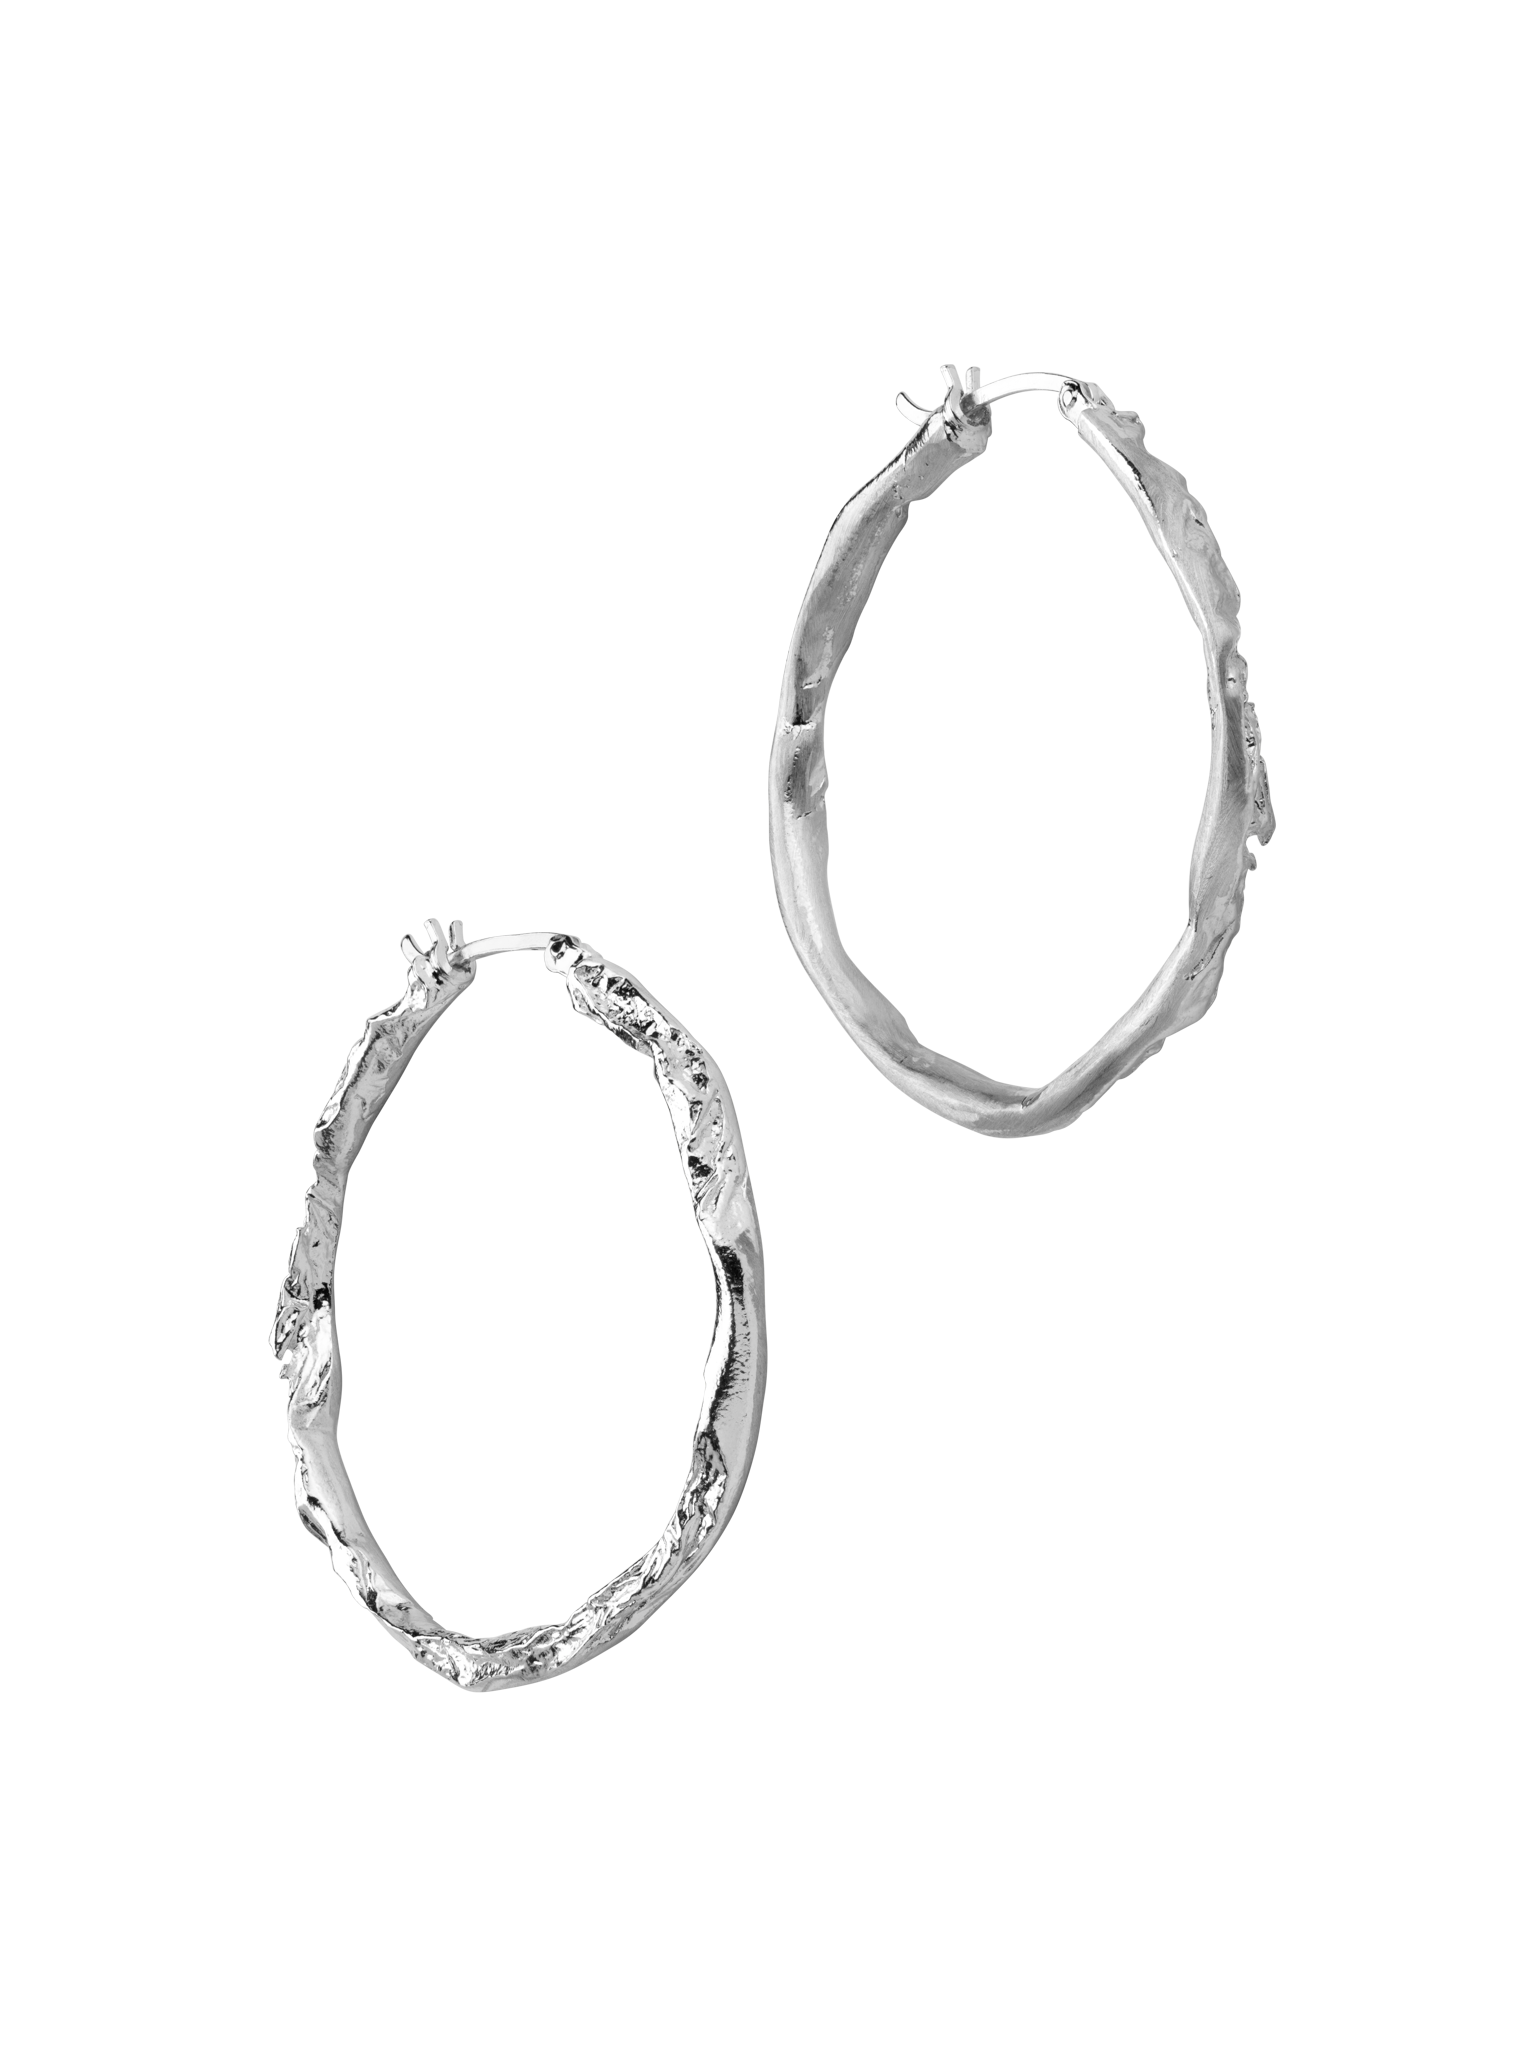 Large molten hinge clasp hoops